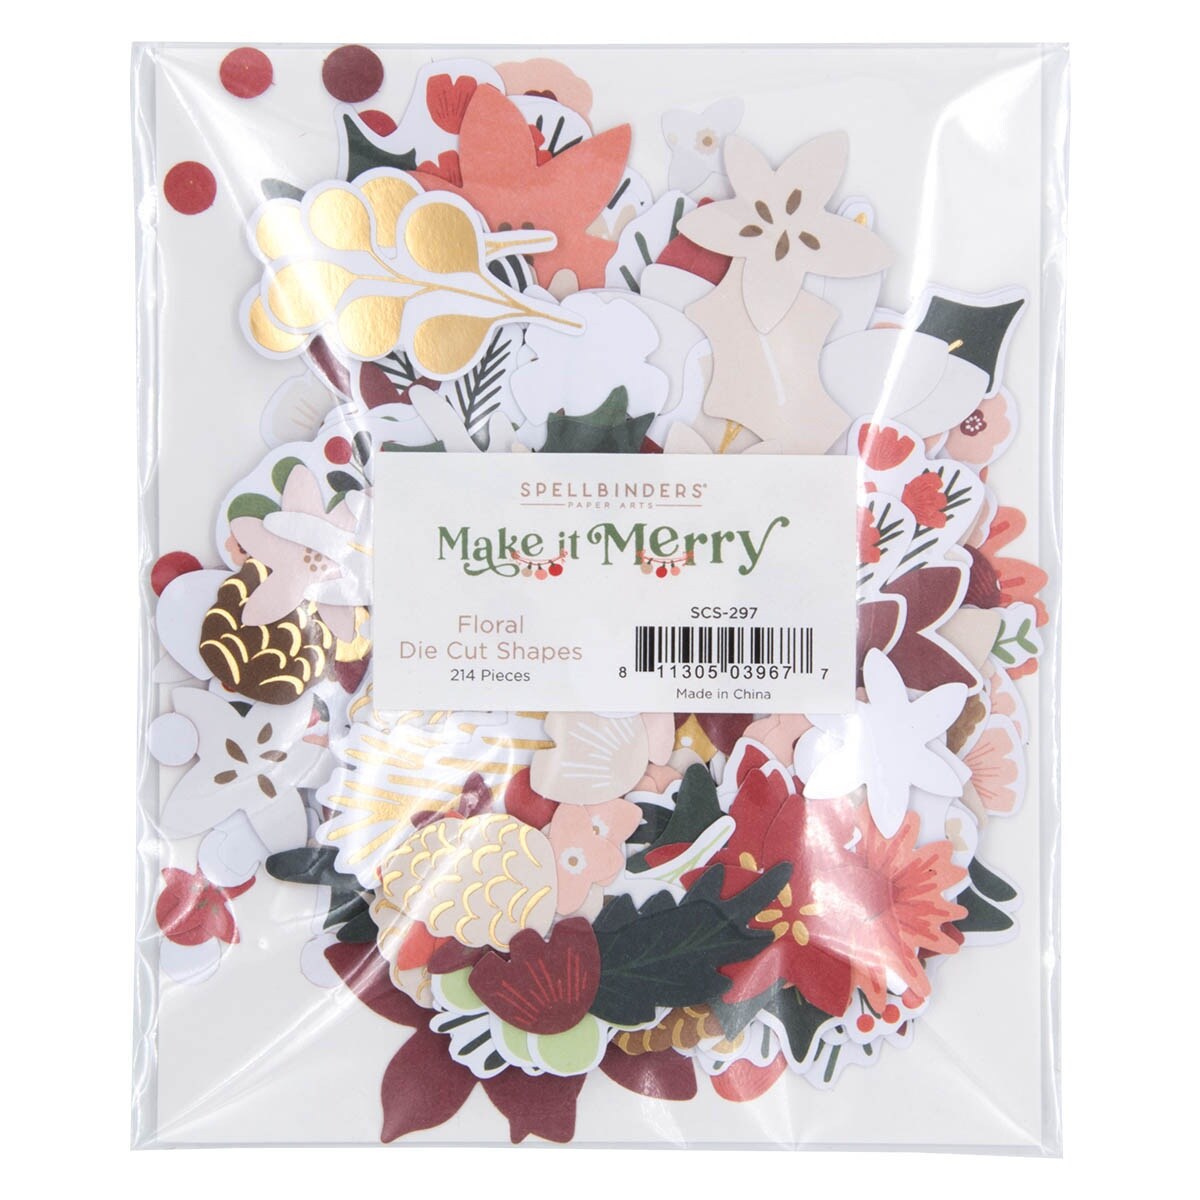 Spellbinders Printed Die-Cuts From Make It Merry Collection-Make It Merry Floral